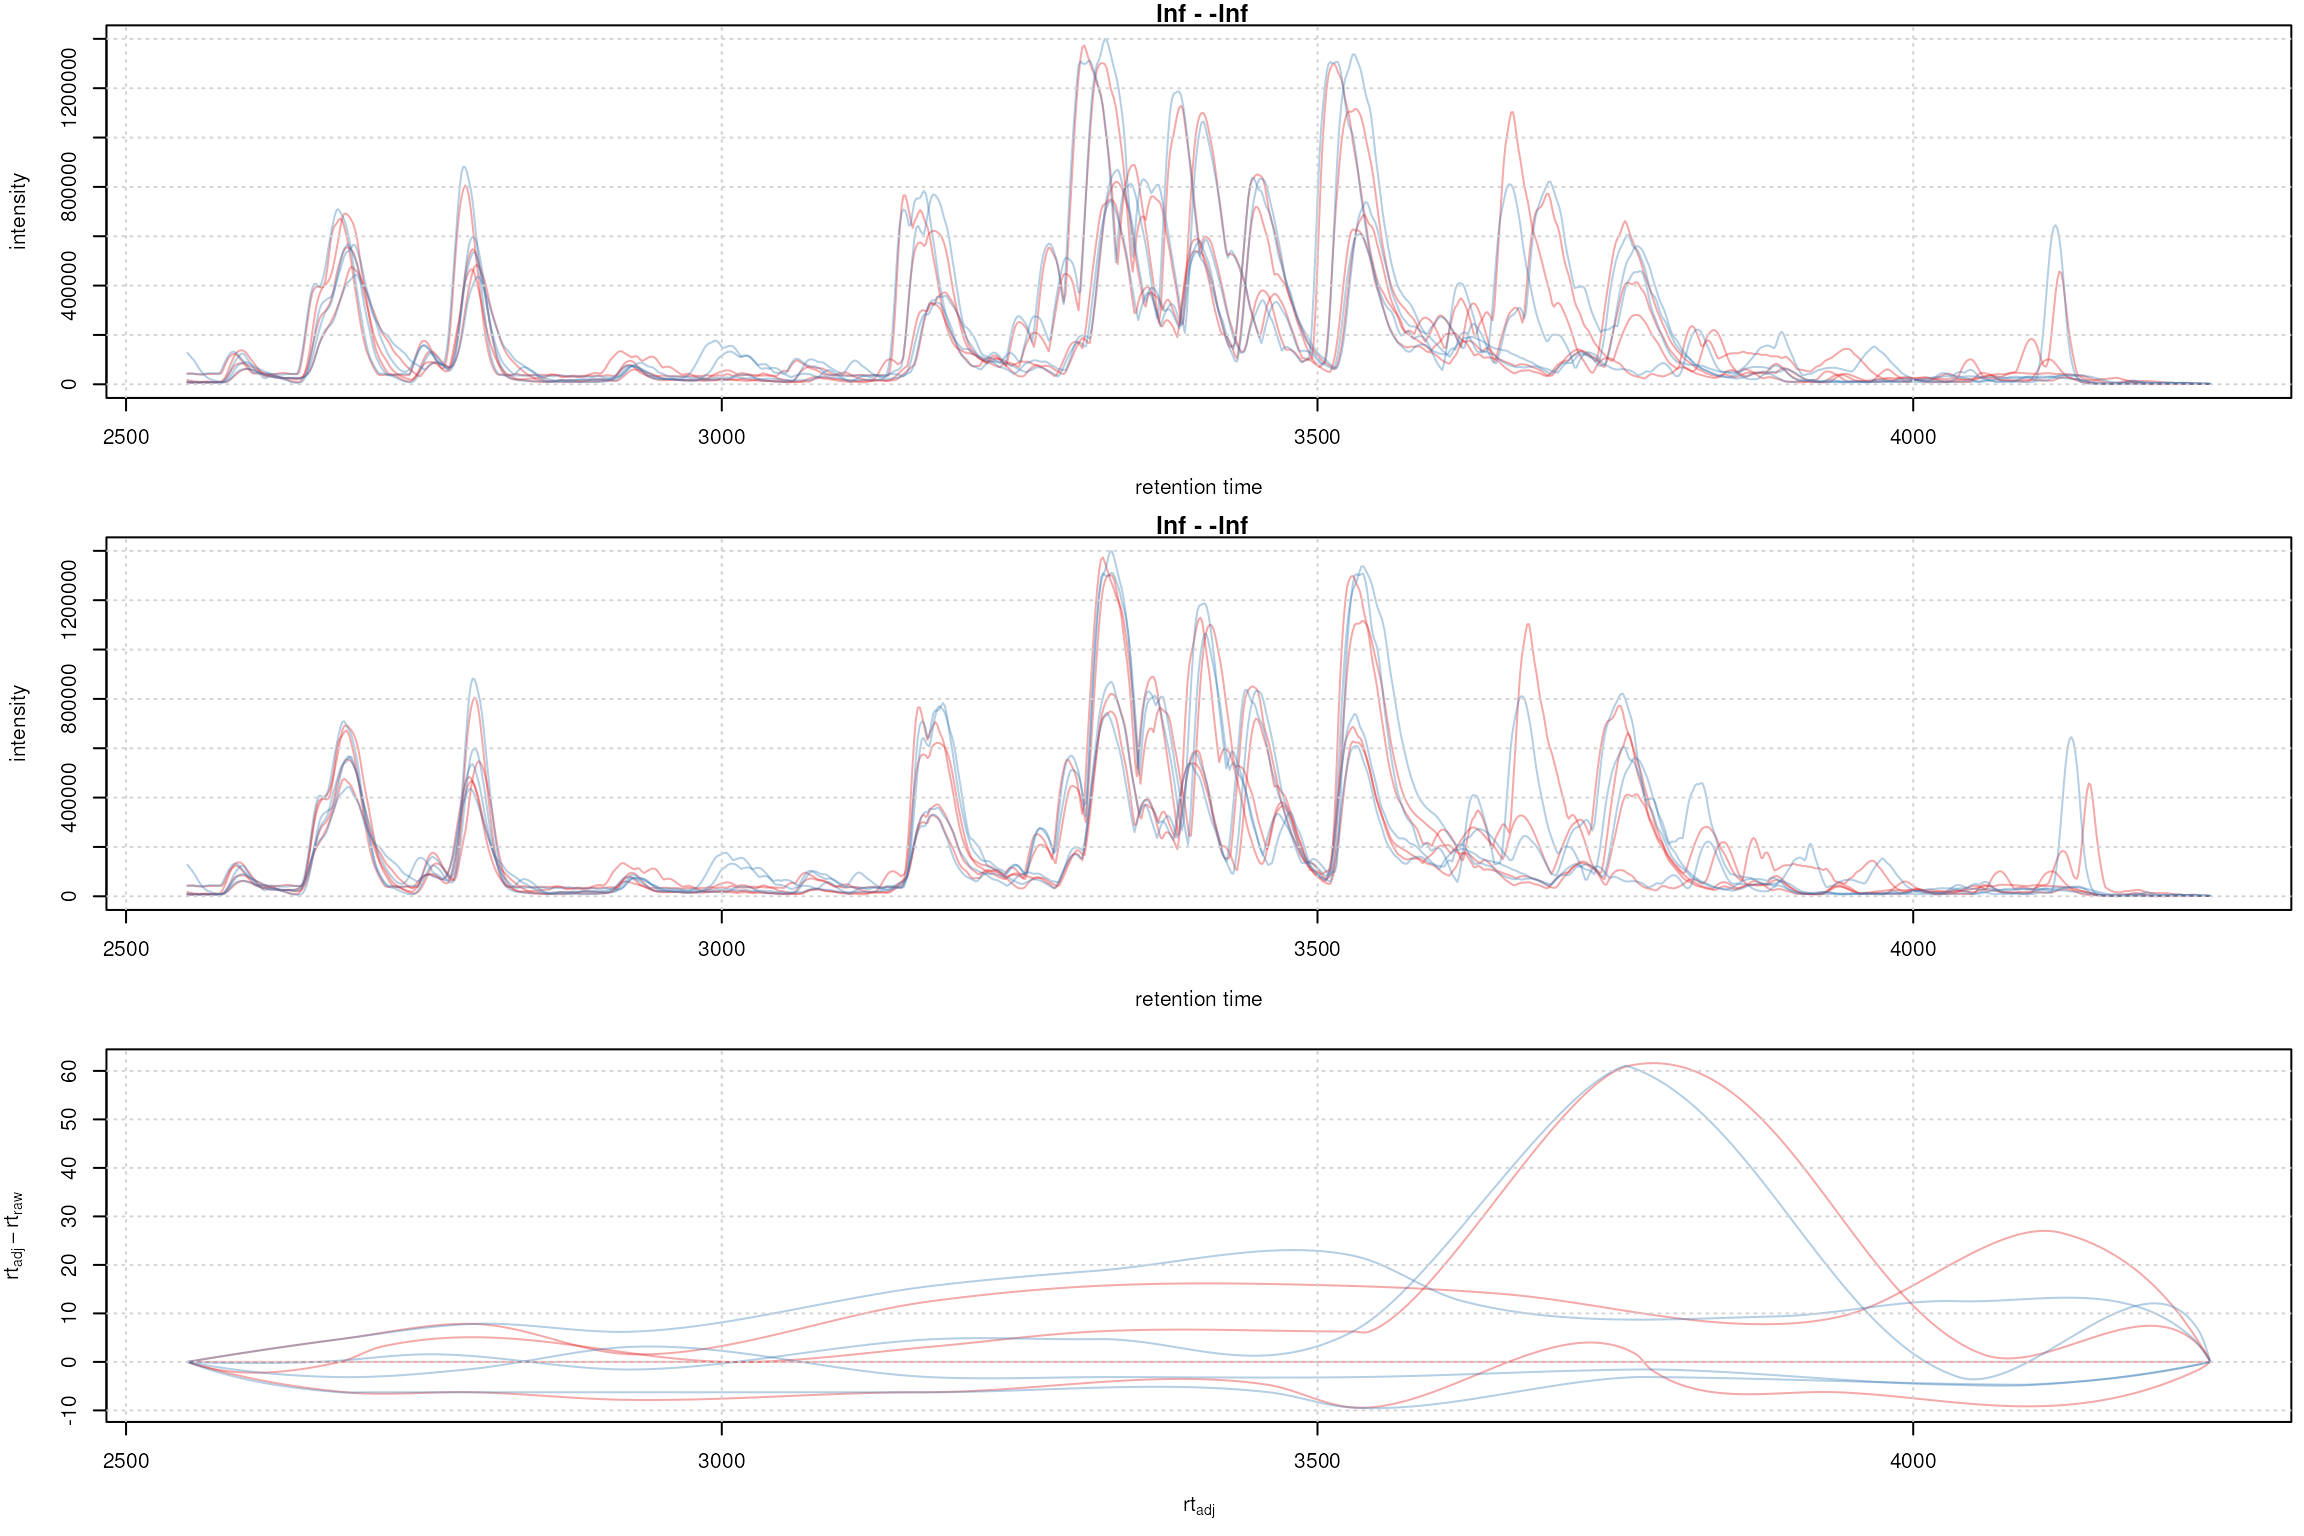 Obiwarp aligned data. Base peak chromatogram before (top) and after alignment (middle) and difference between adjusted and raw retention times along the retention time axis (bottom).